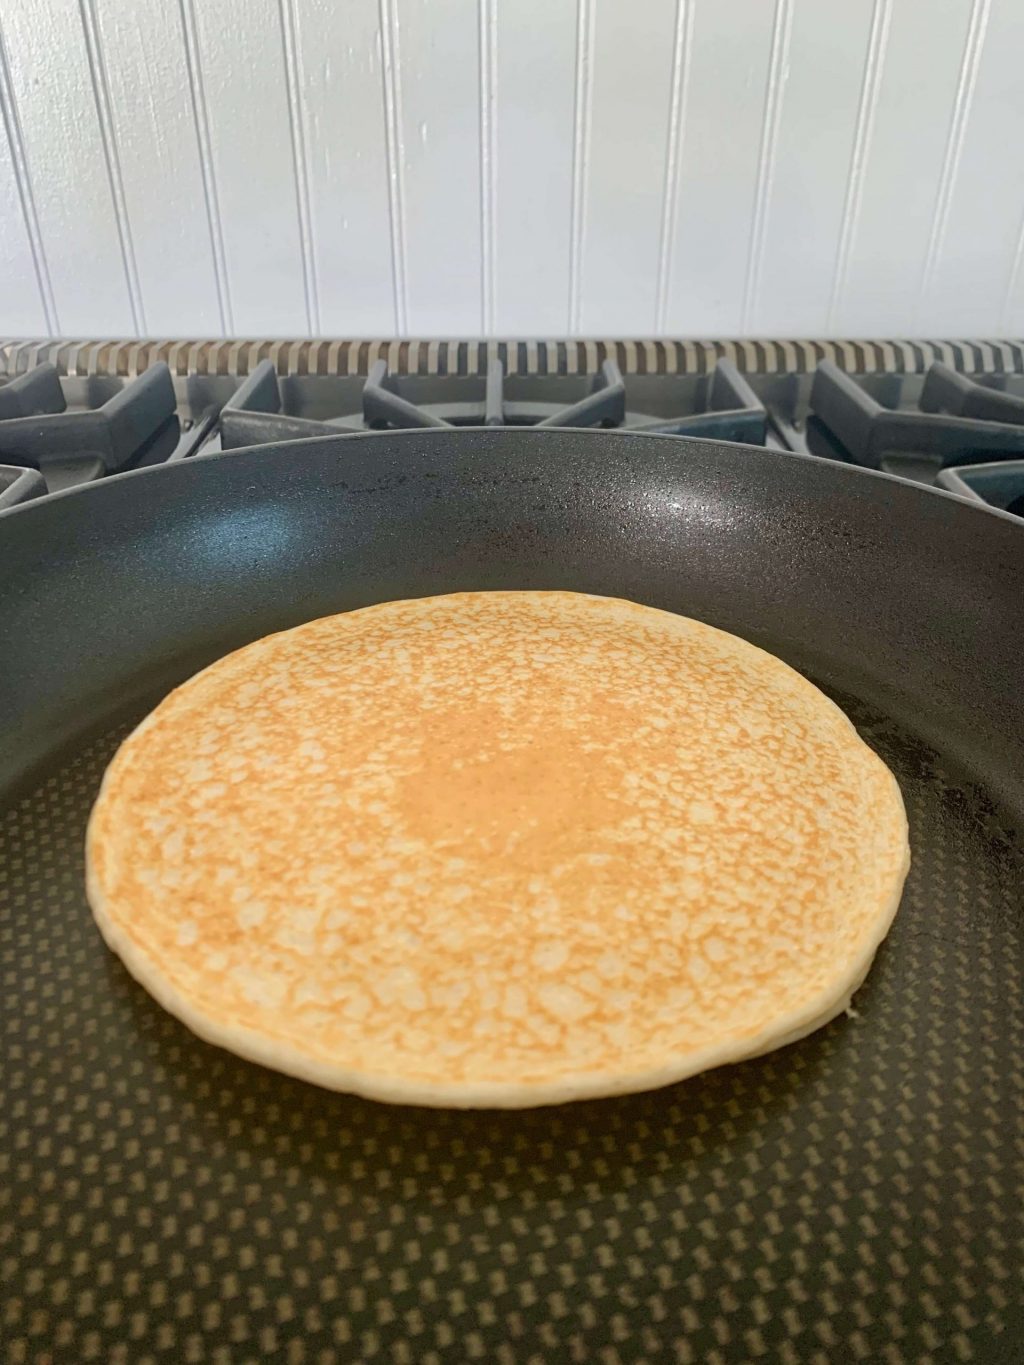 Protein pancake being cooked